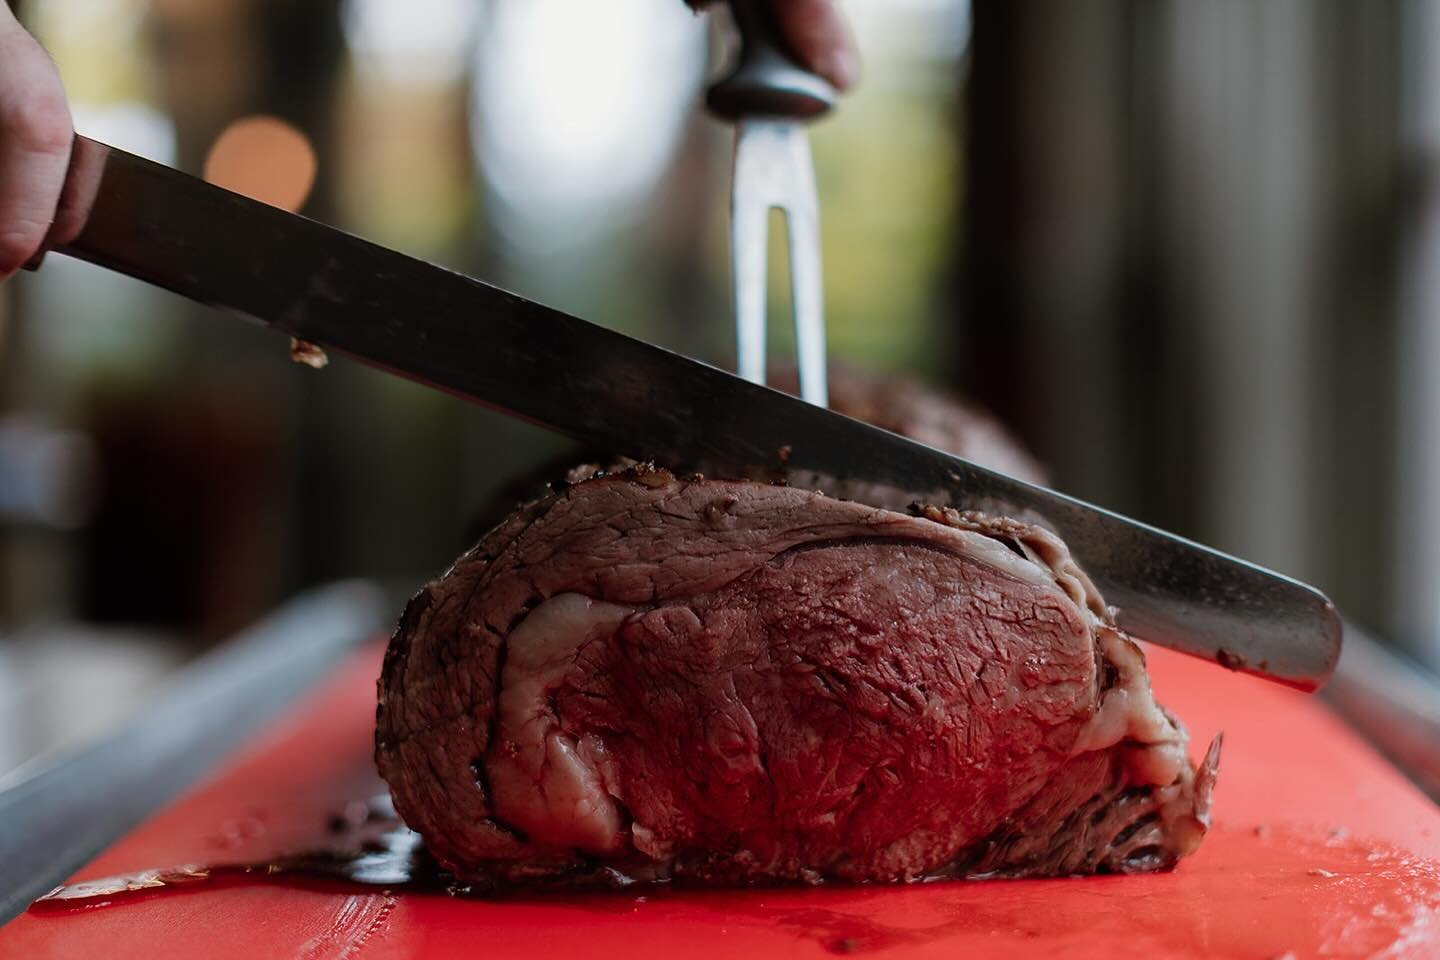 It&rsquo;s Friday which means tonight&rsquo;s feature is Prime Rib! 

Give us a call to book a reservation and pre order your prime rib to make sure you get one before it sells out!

👨&zwj;🍳 Reservations 905-377-8177
🖥️ Link in bio or find us on o